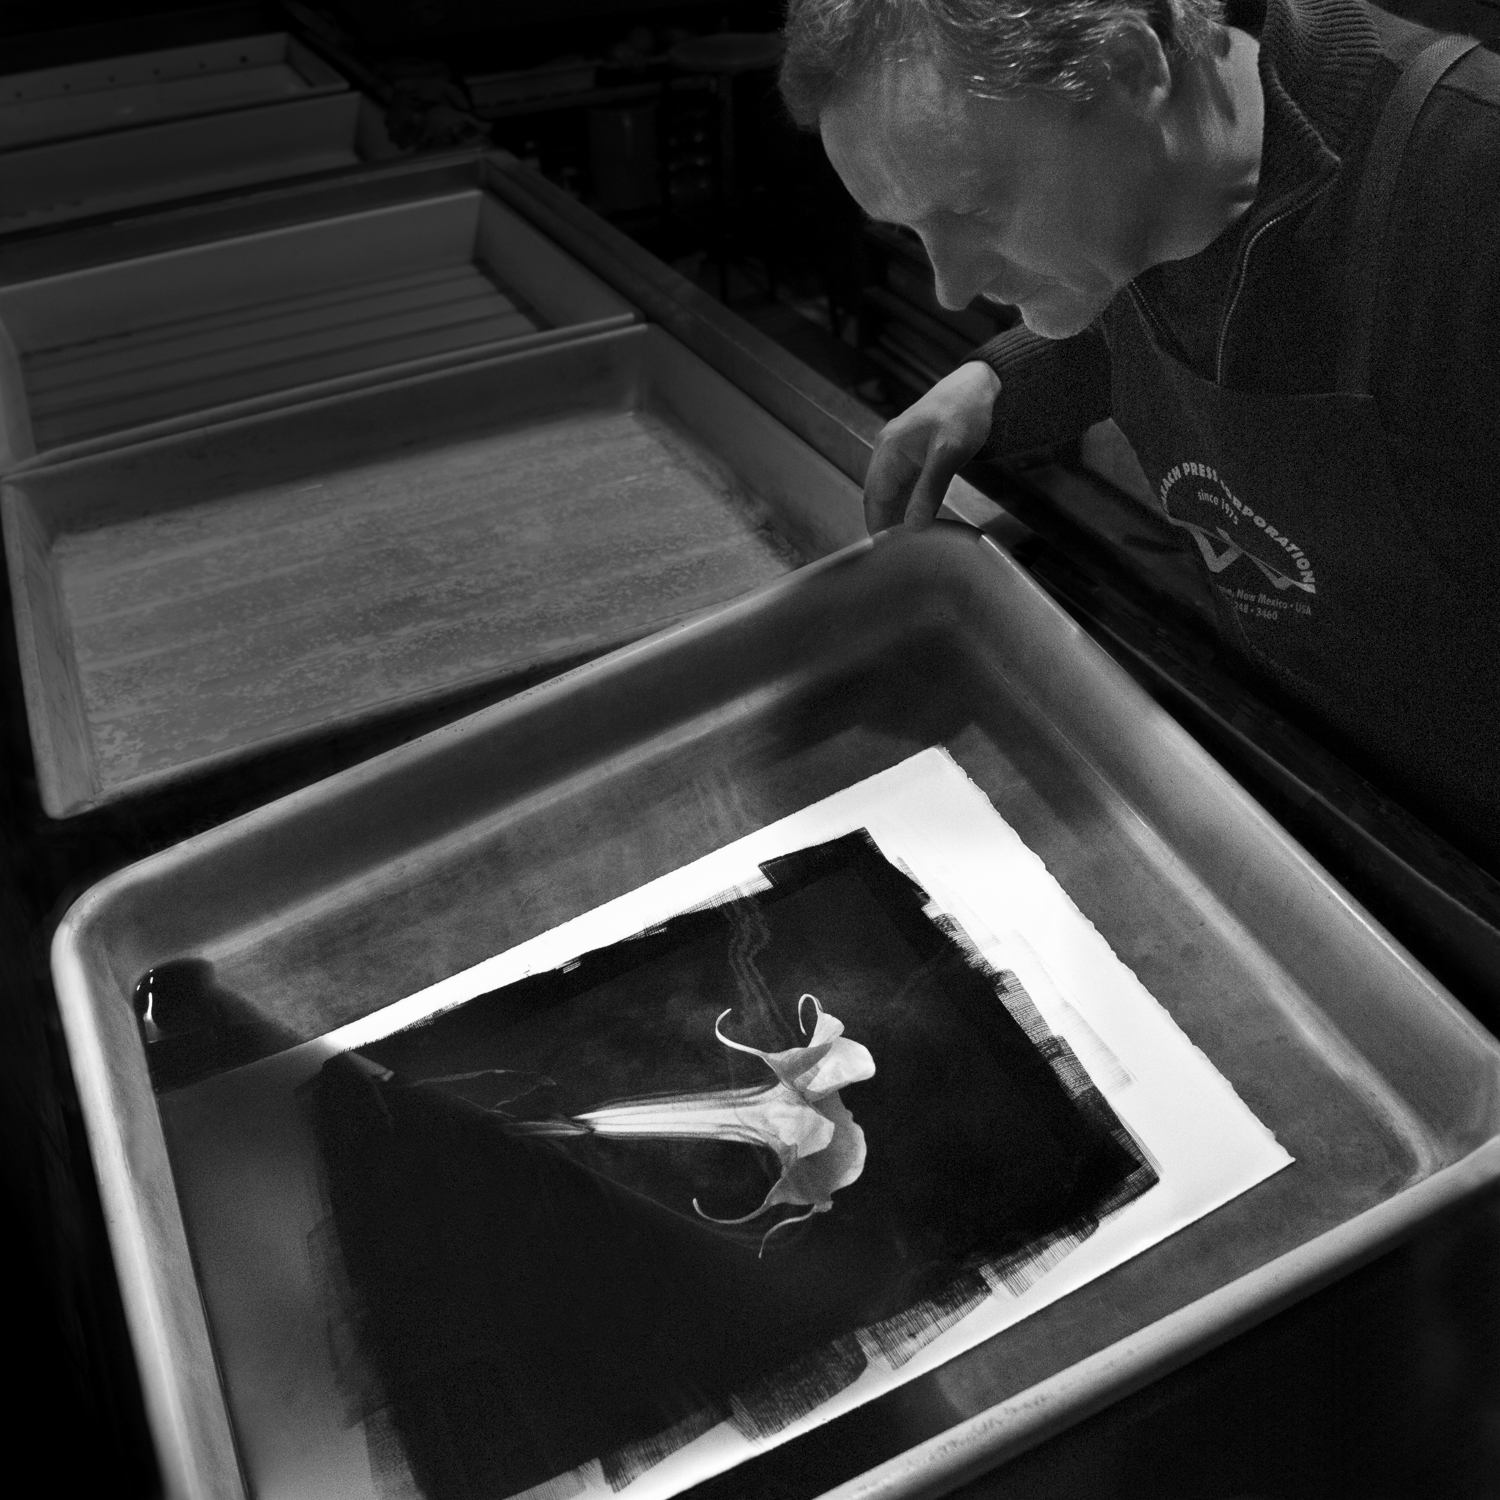 Platinum Photography Printing Process with photographer Cy DeCosse and printer Keith Taylor